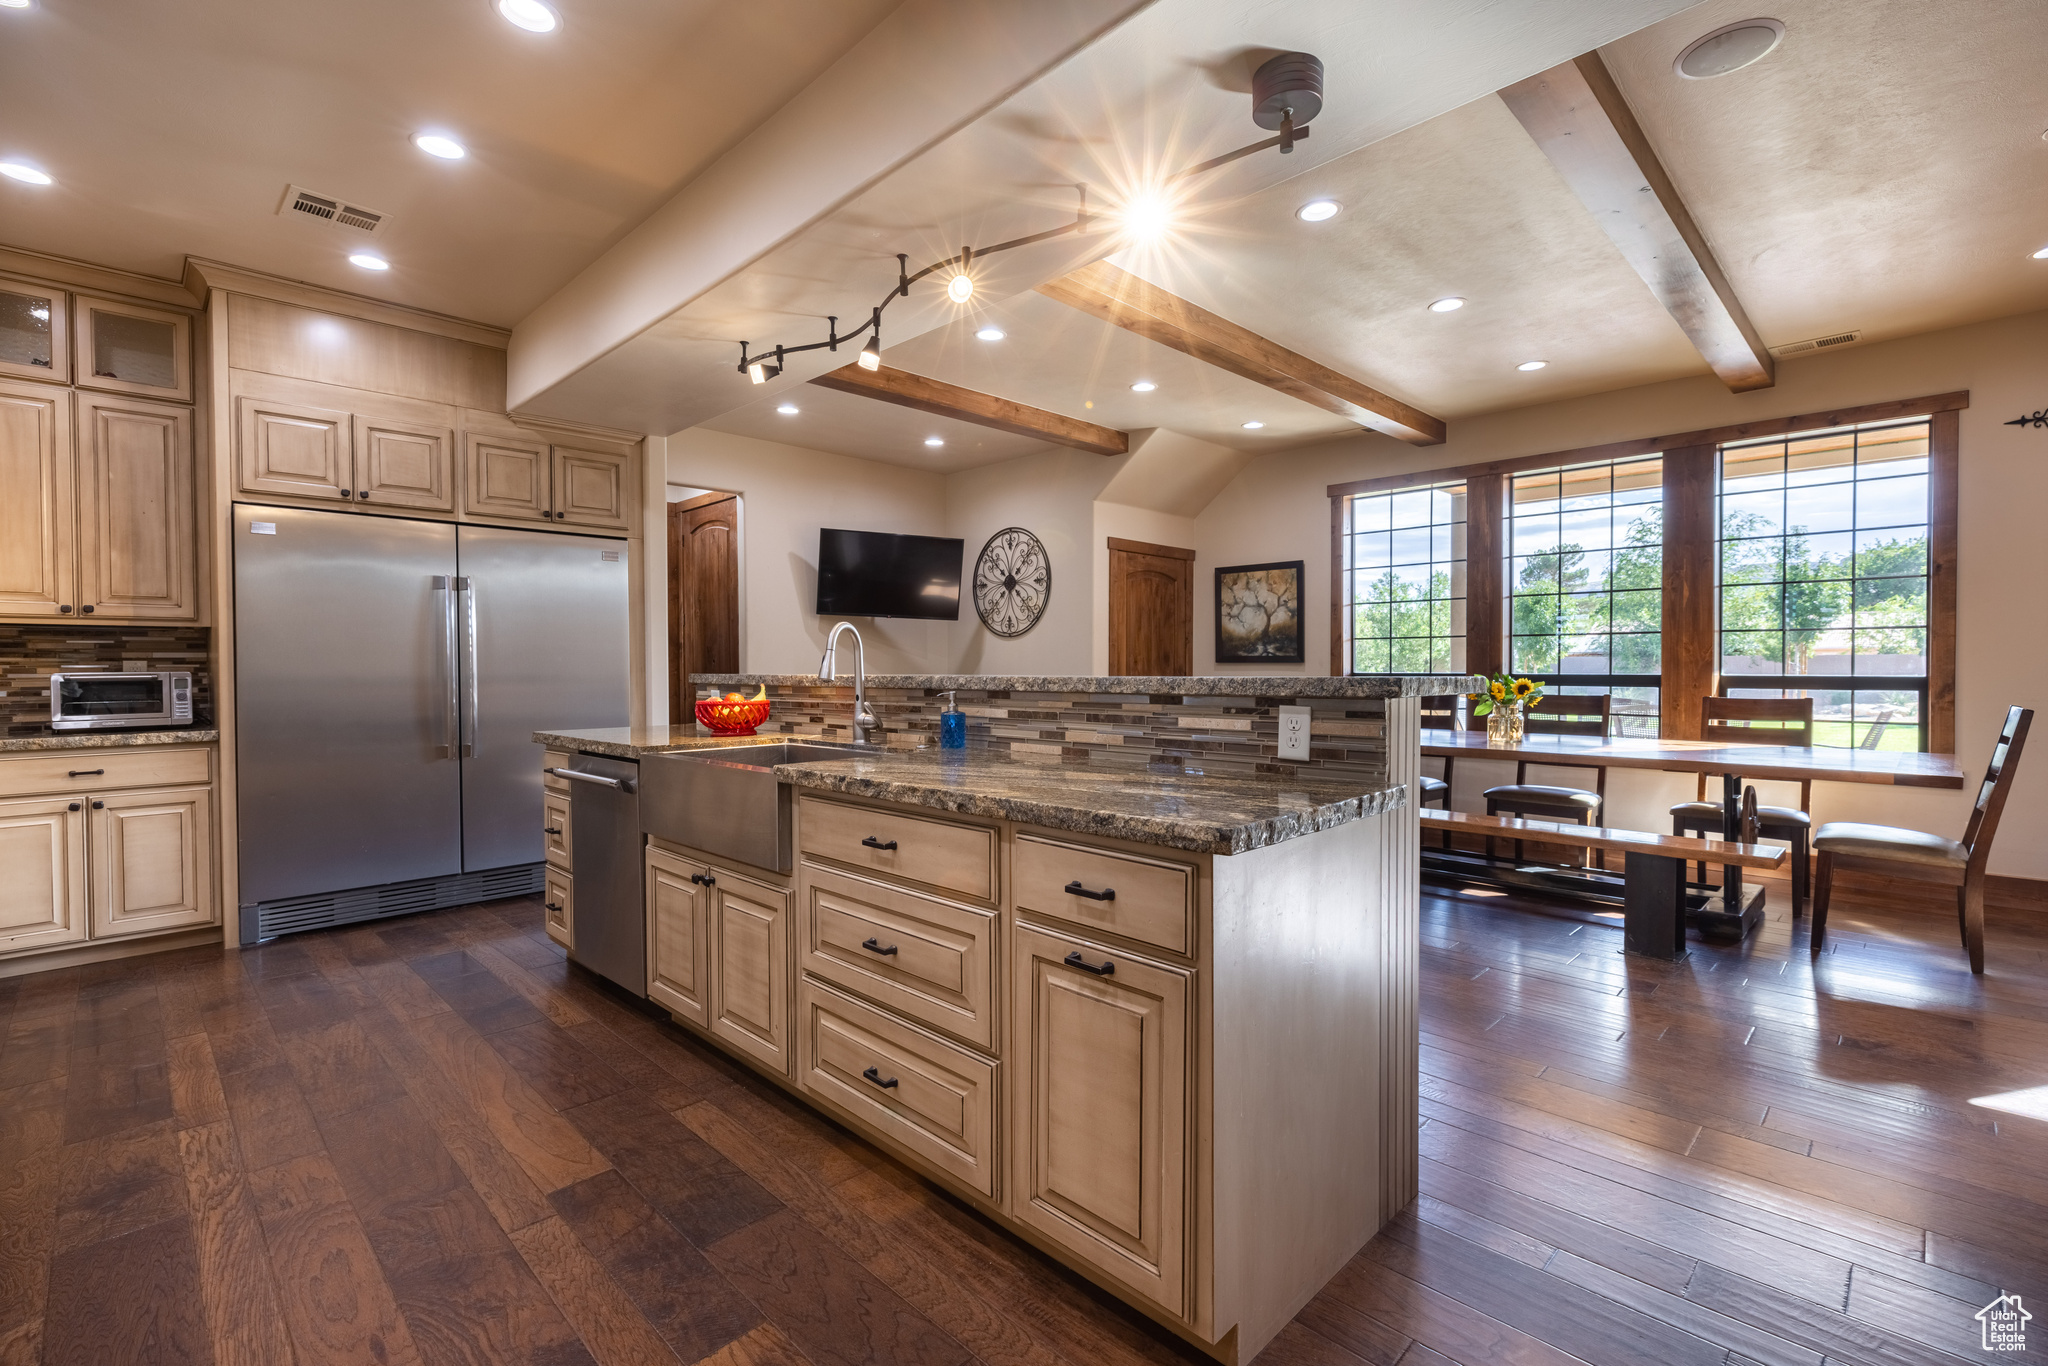 Kitchen with backsplash, stainless steel appliances, beam ceiling, dark wood-type flooring, and an island with sink